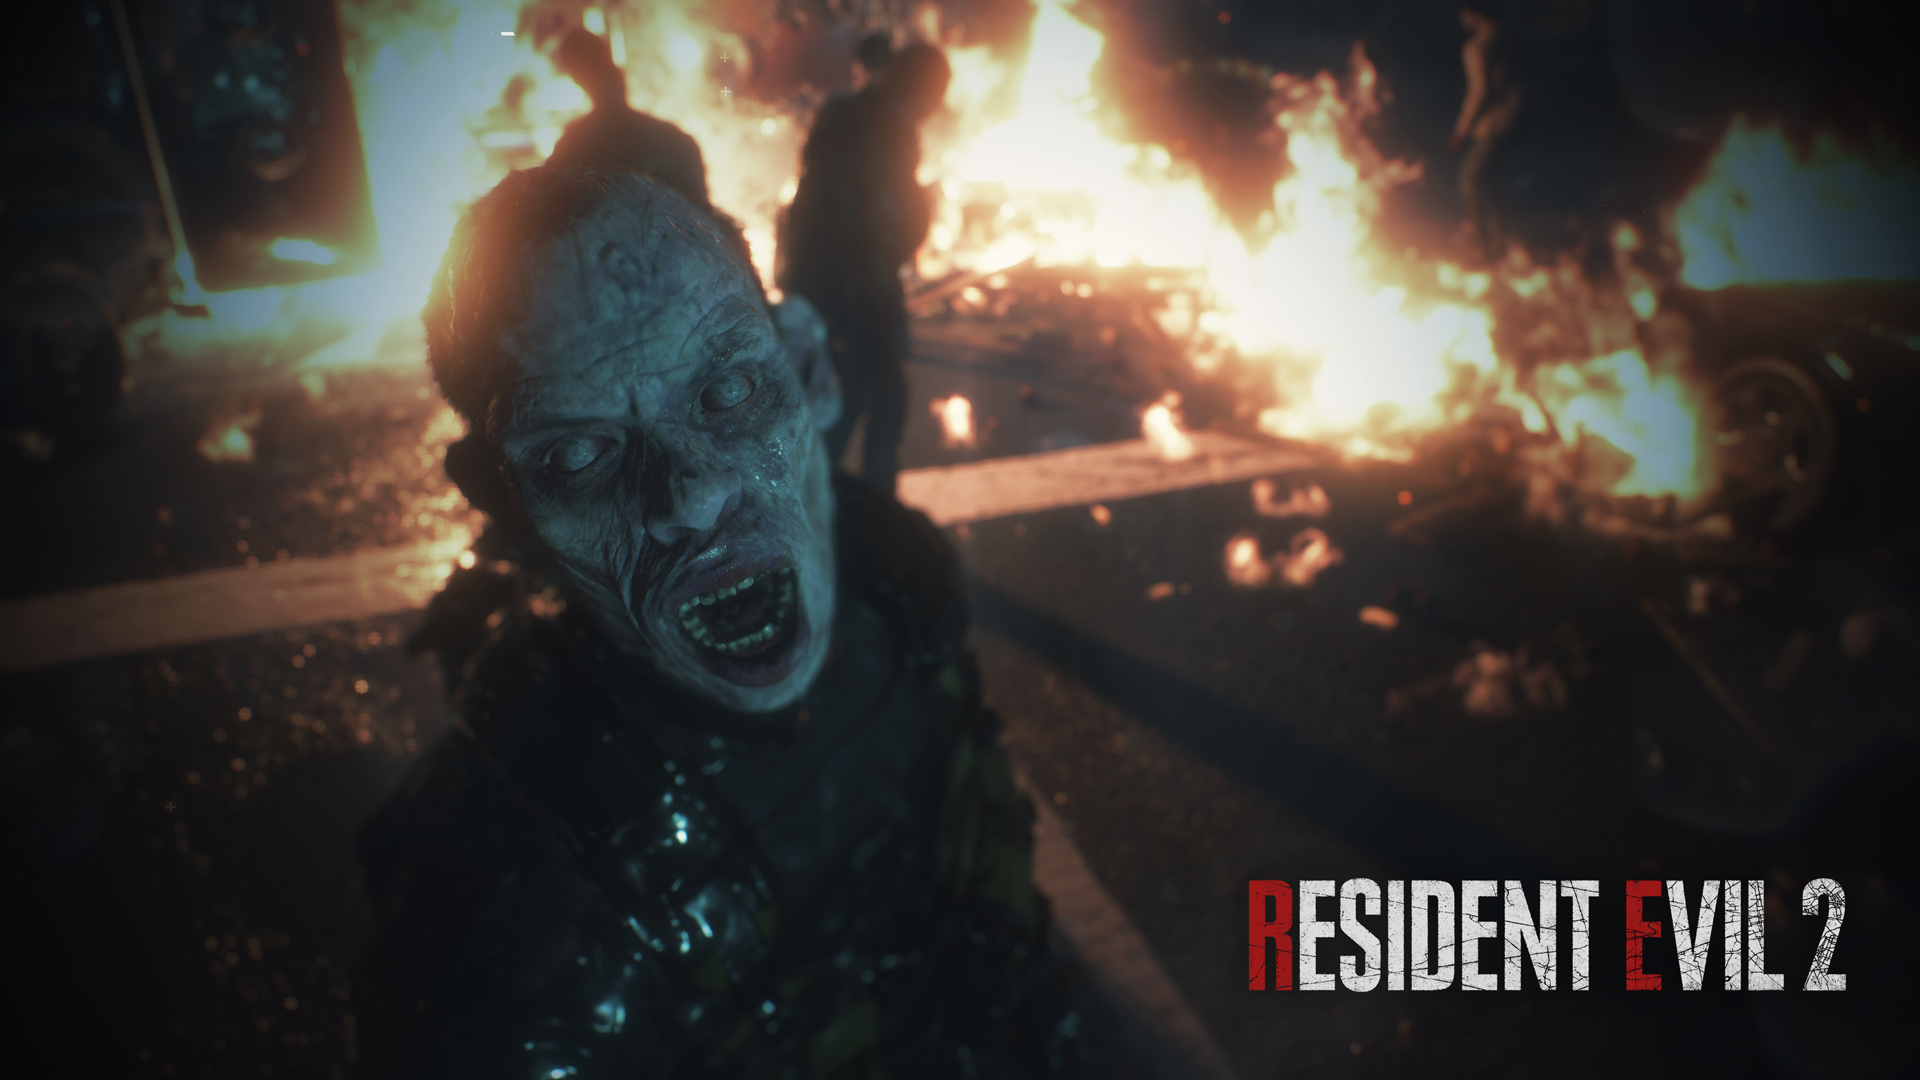 General 1920x1080 Resident Evil 2 video games video game art zombies